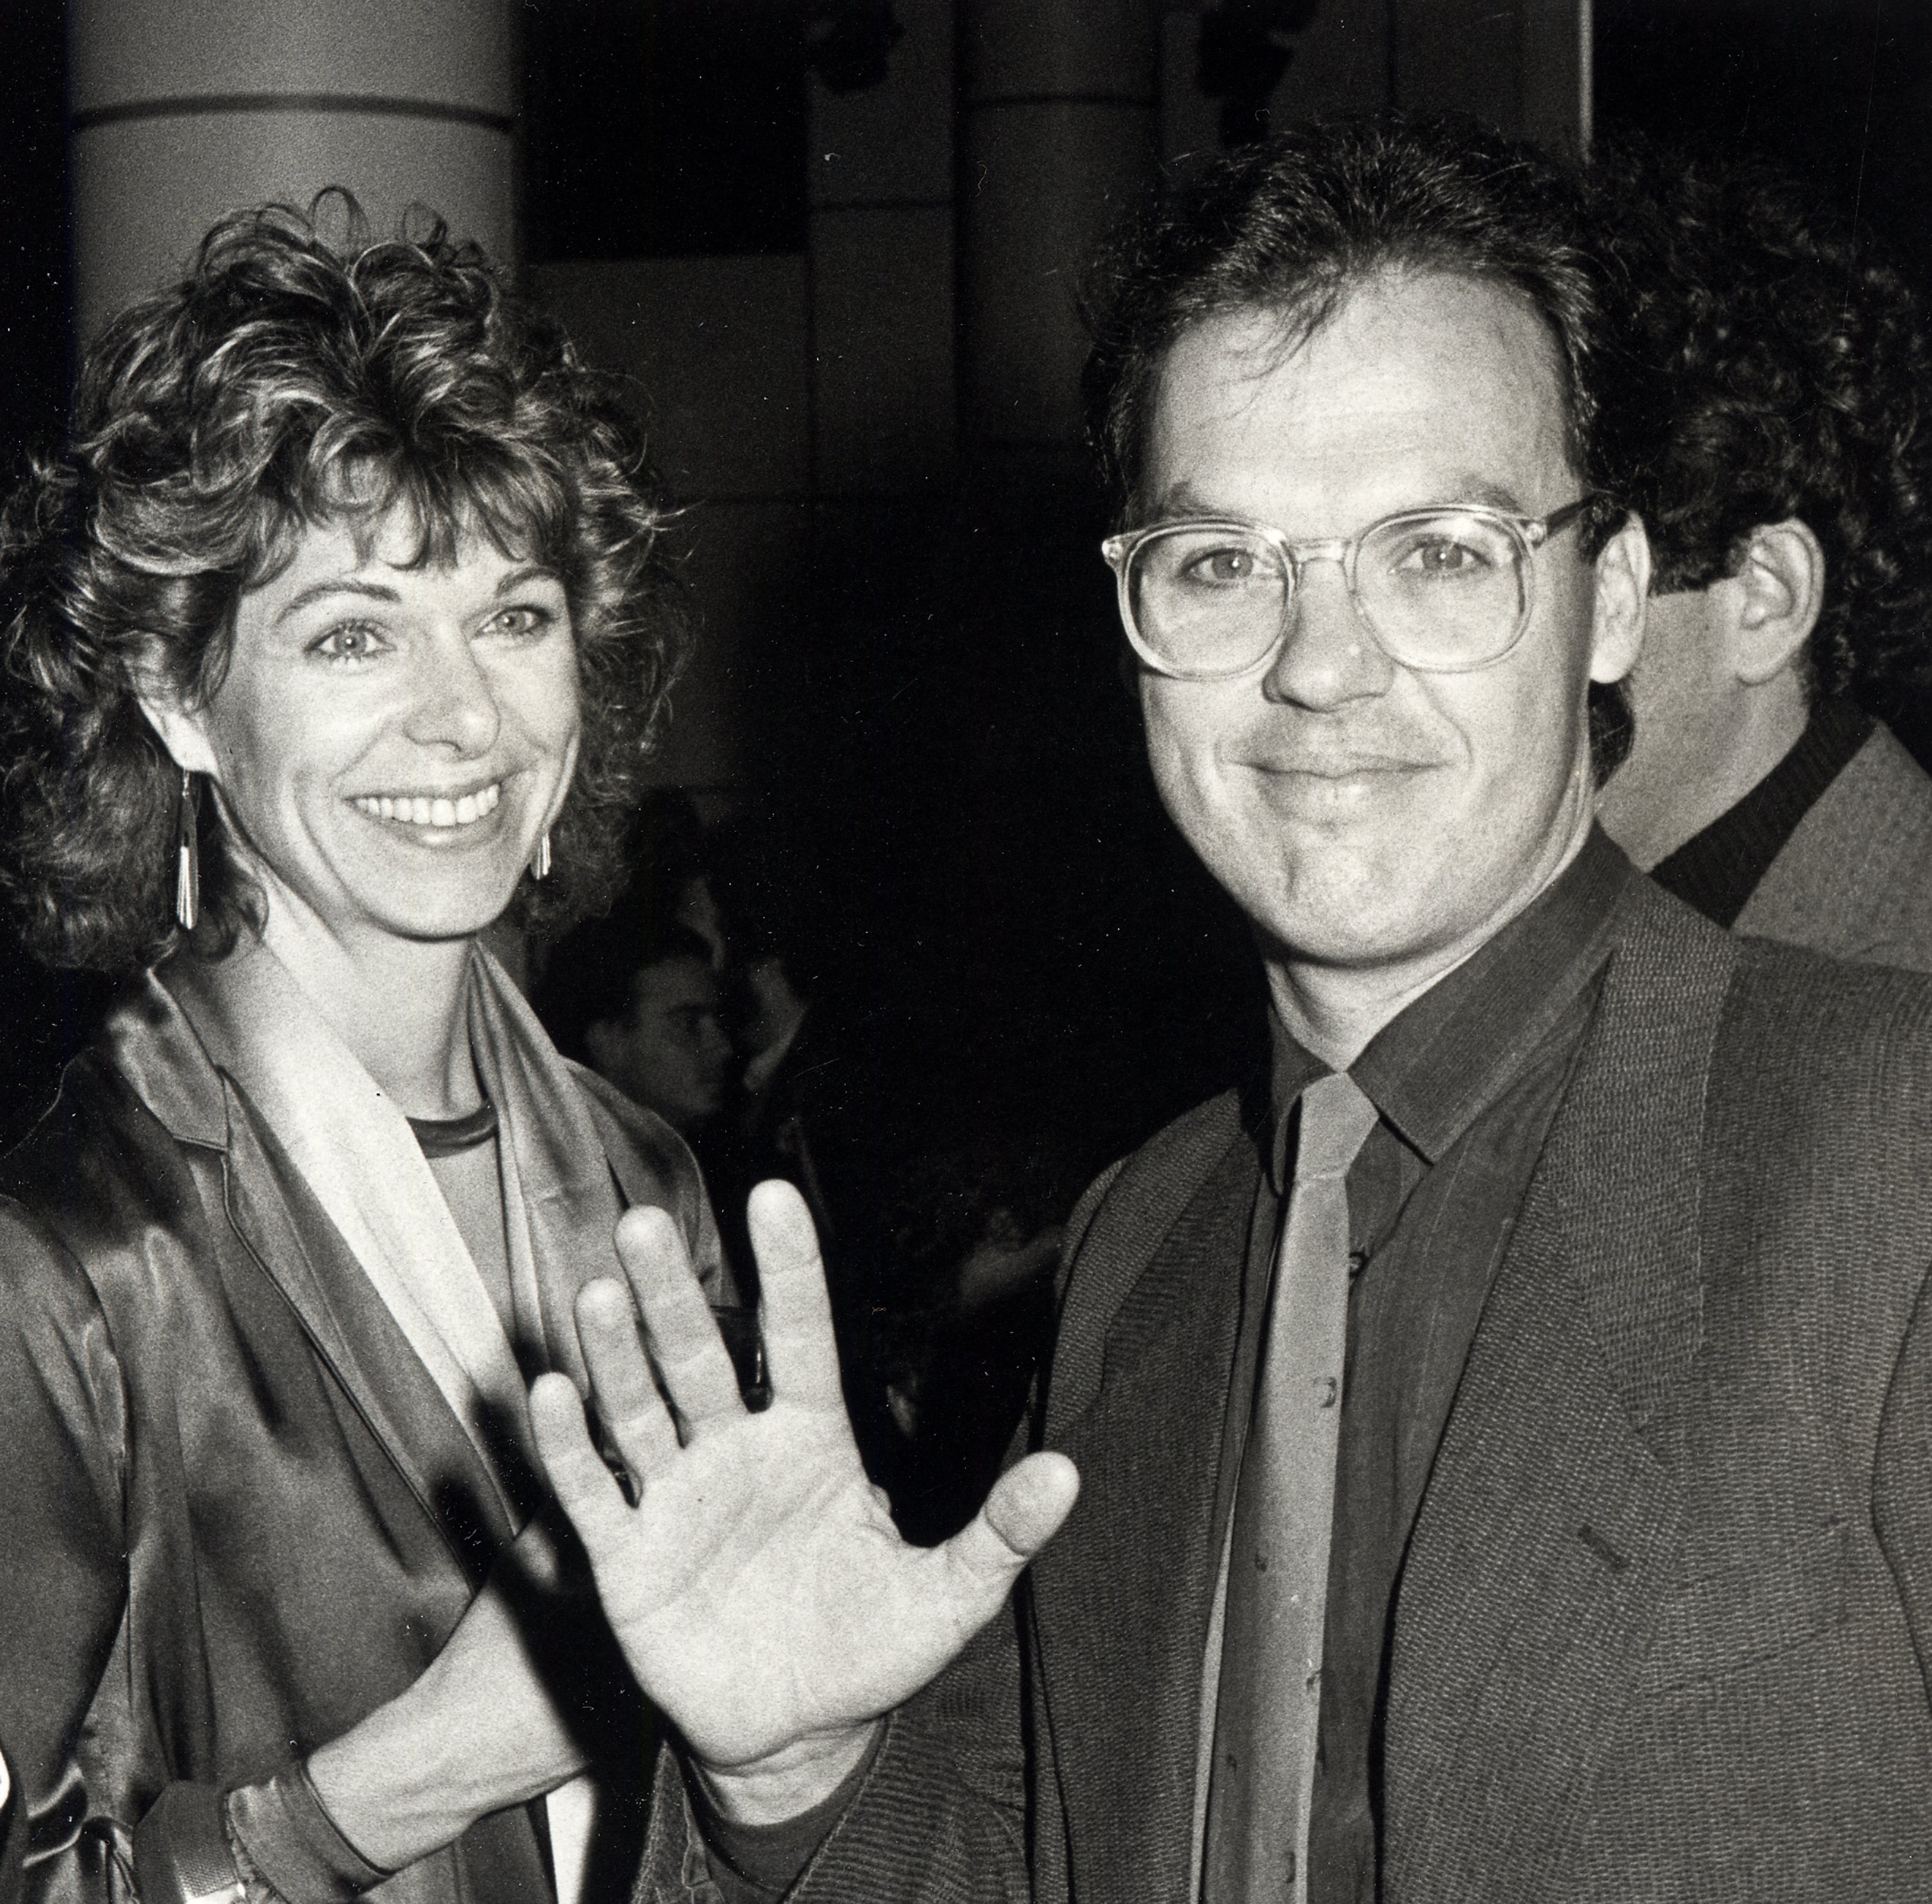 Michael Keaton and Caroline McWilliams at the premiere party for "Johnny Dangerously" at Private Eyes in New York City, New York, on December 18, 1984. | Source: Getty Images